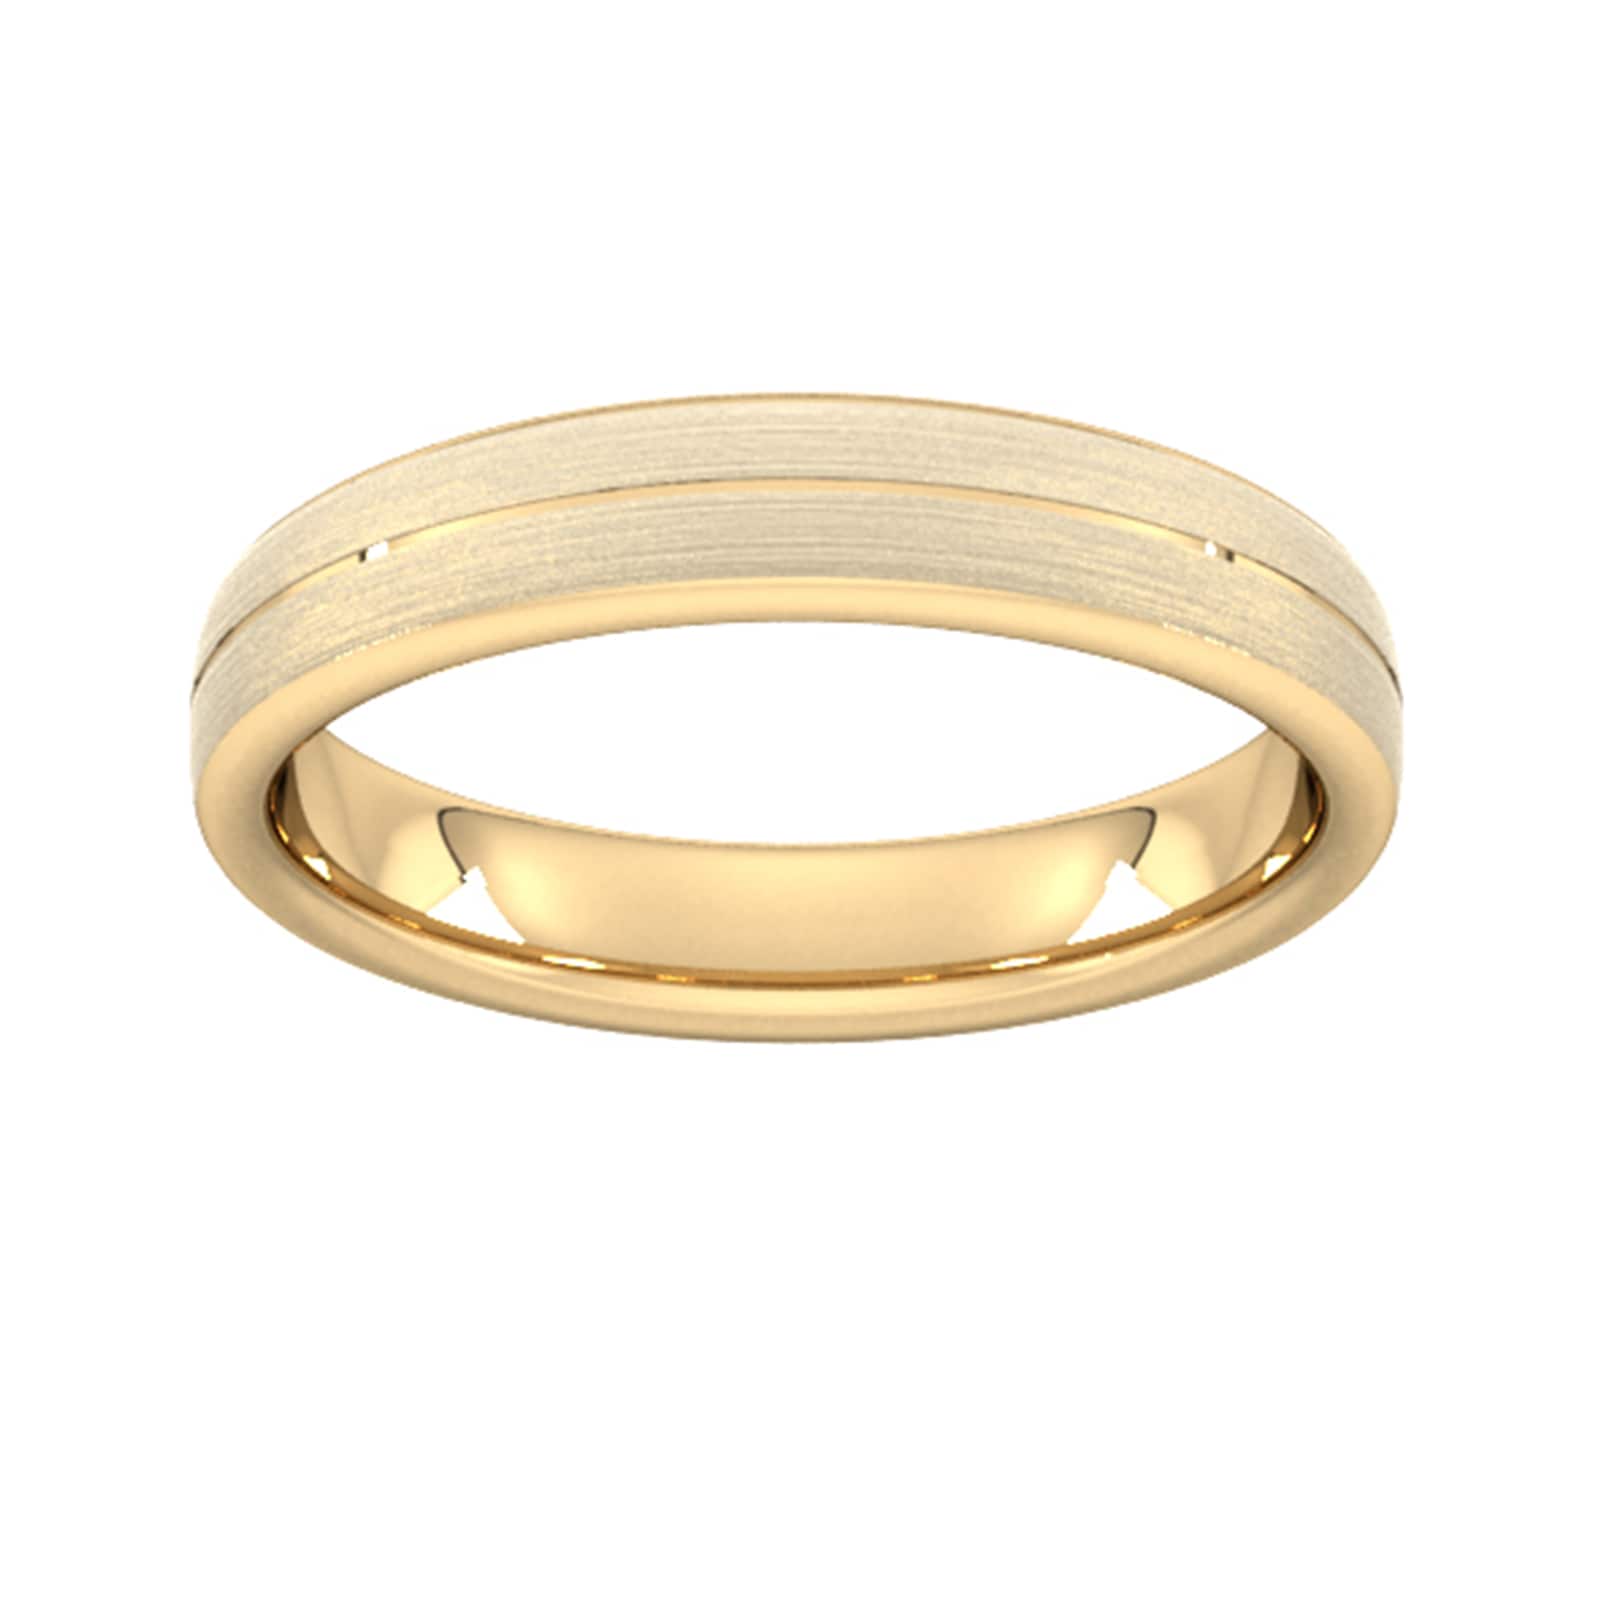 4mm D Shape Heavy Centre Groove With Chamfered Edge Wedding Ring In 18 Carat Yellow Gold - Ring Size V